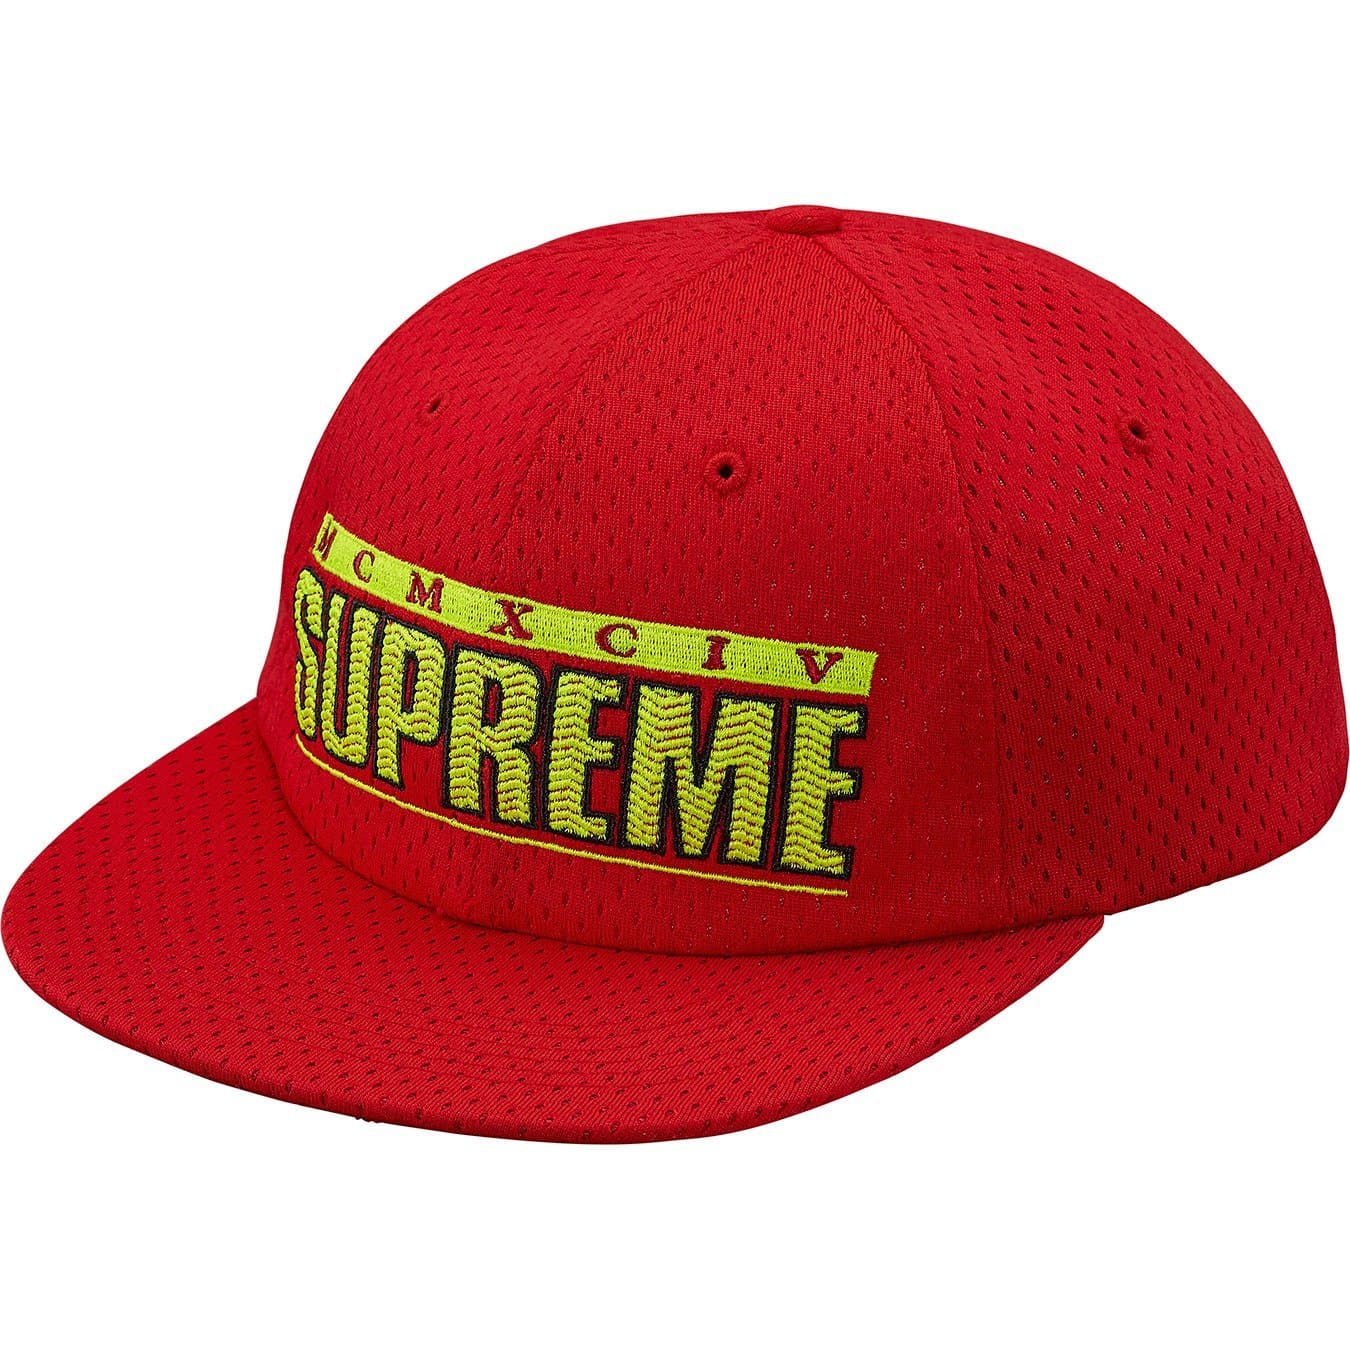 Hats 18. Supreme cap FW 19. Supreme ss21. Кепка the North face. Кепка круглая мужская Supreme.